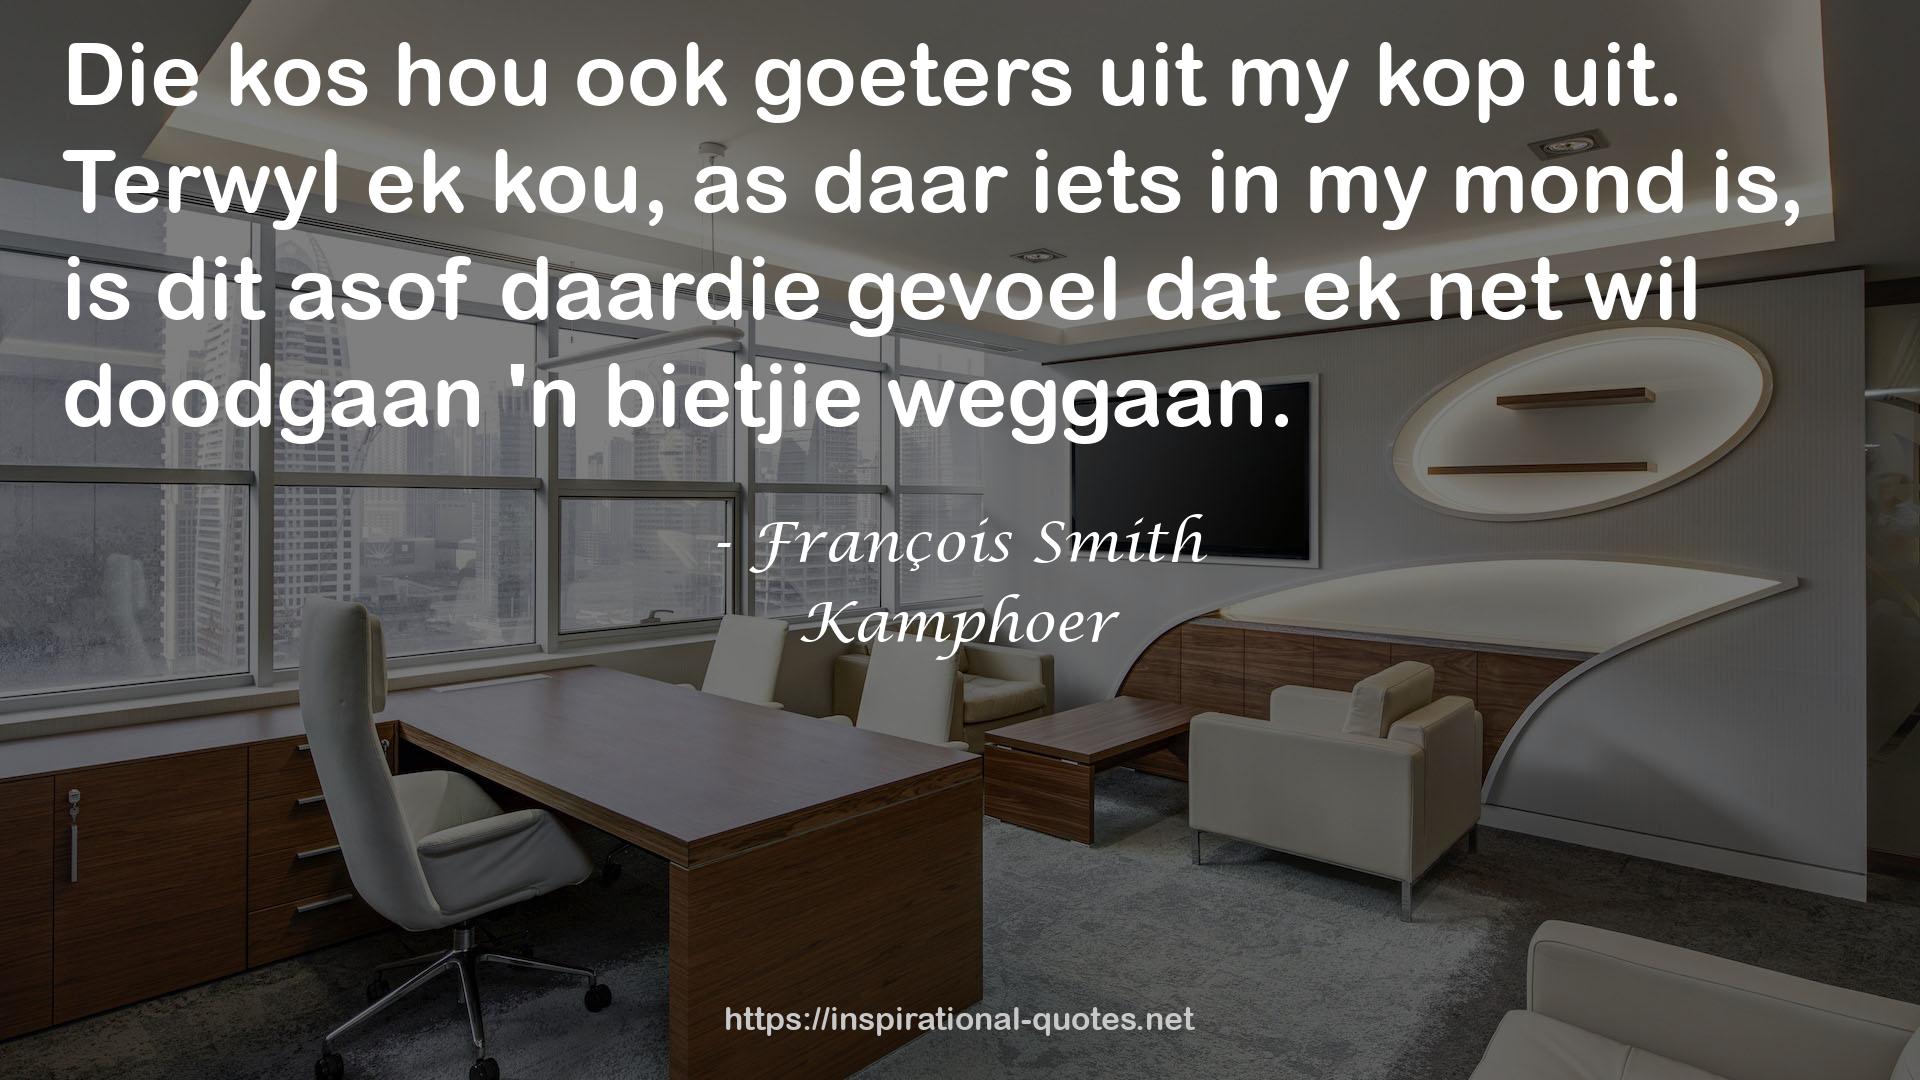 Kamphoer QUOTES